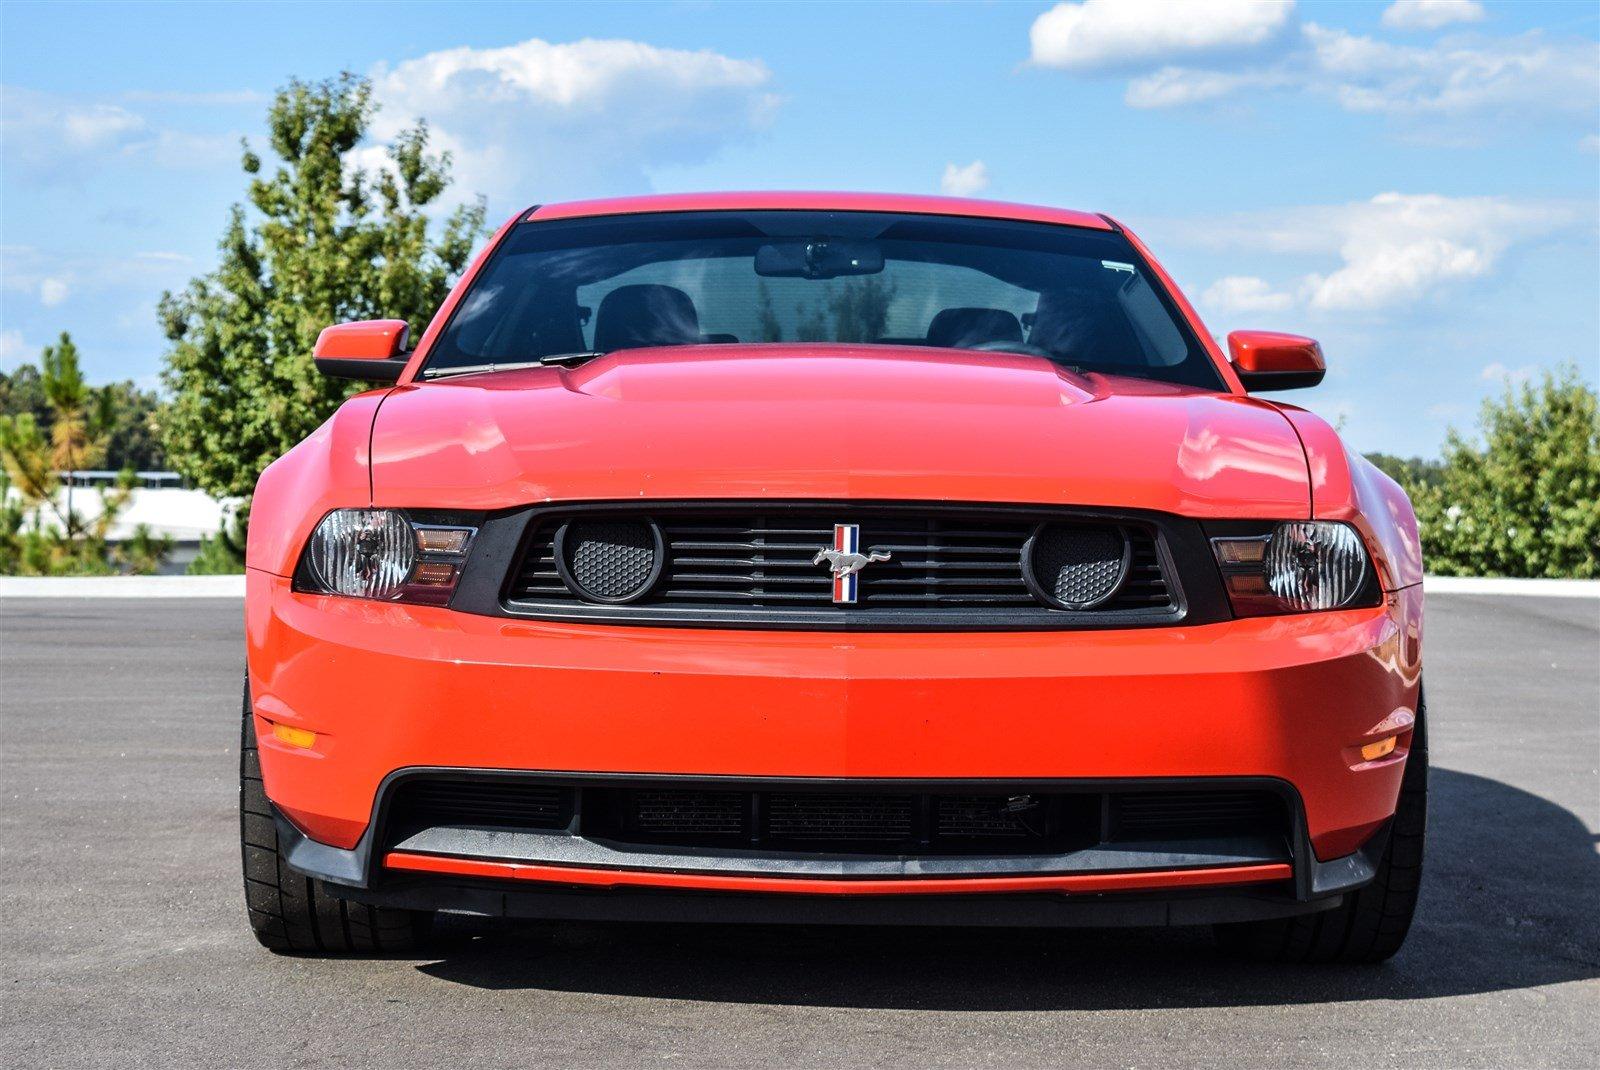 Used 2011 Ford Mustang GT for sale Sold at Gravity Autos Marietta in Marietta GA 30060 6